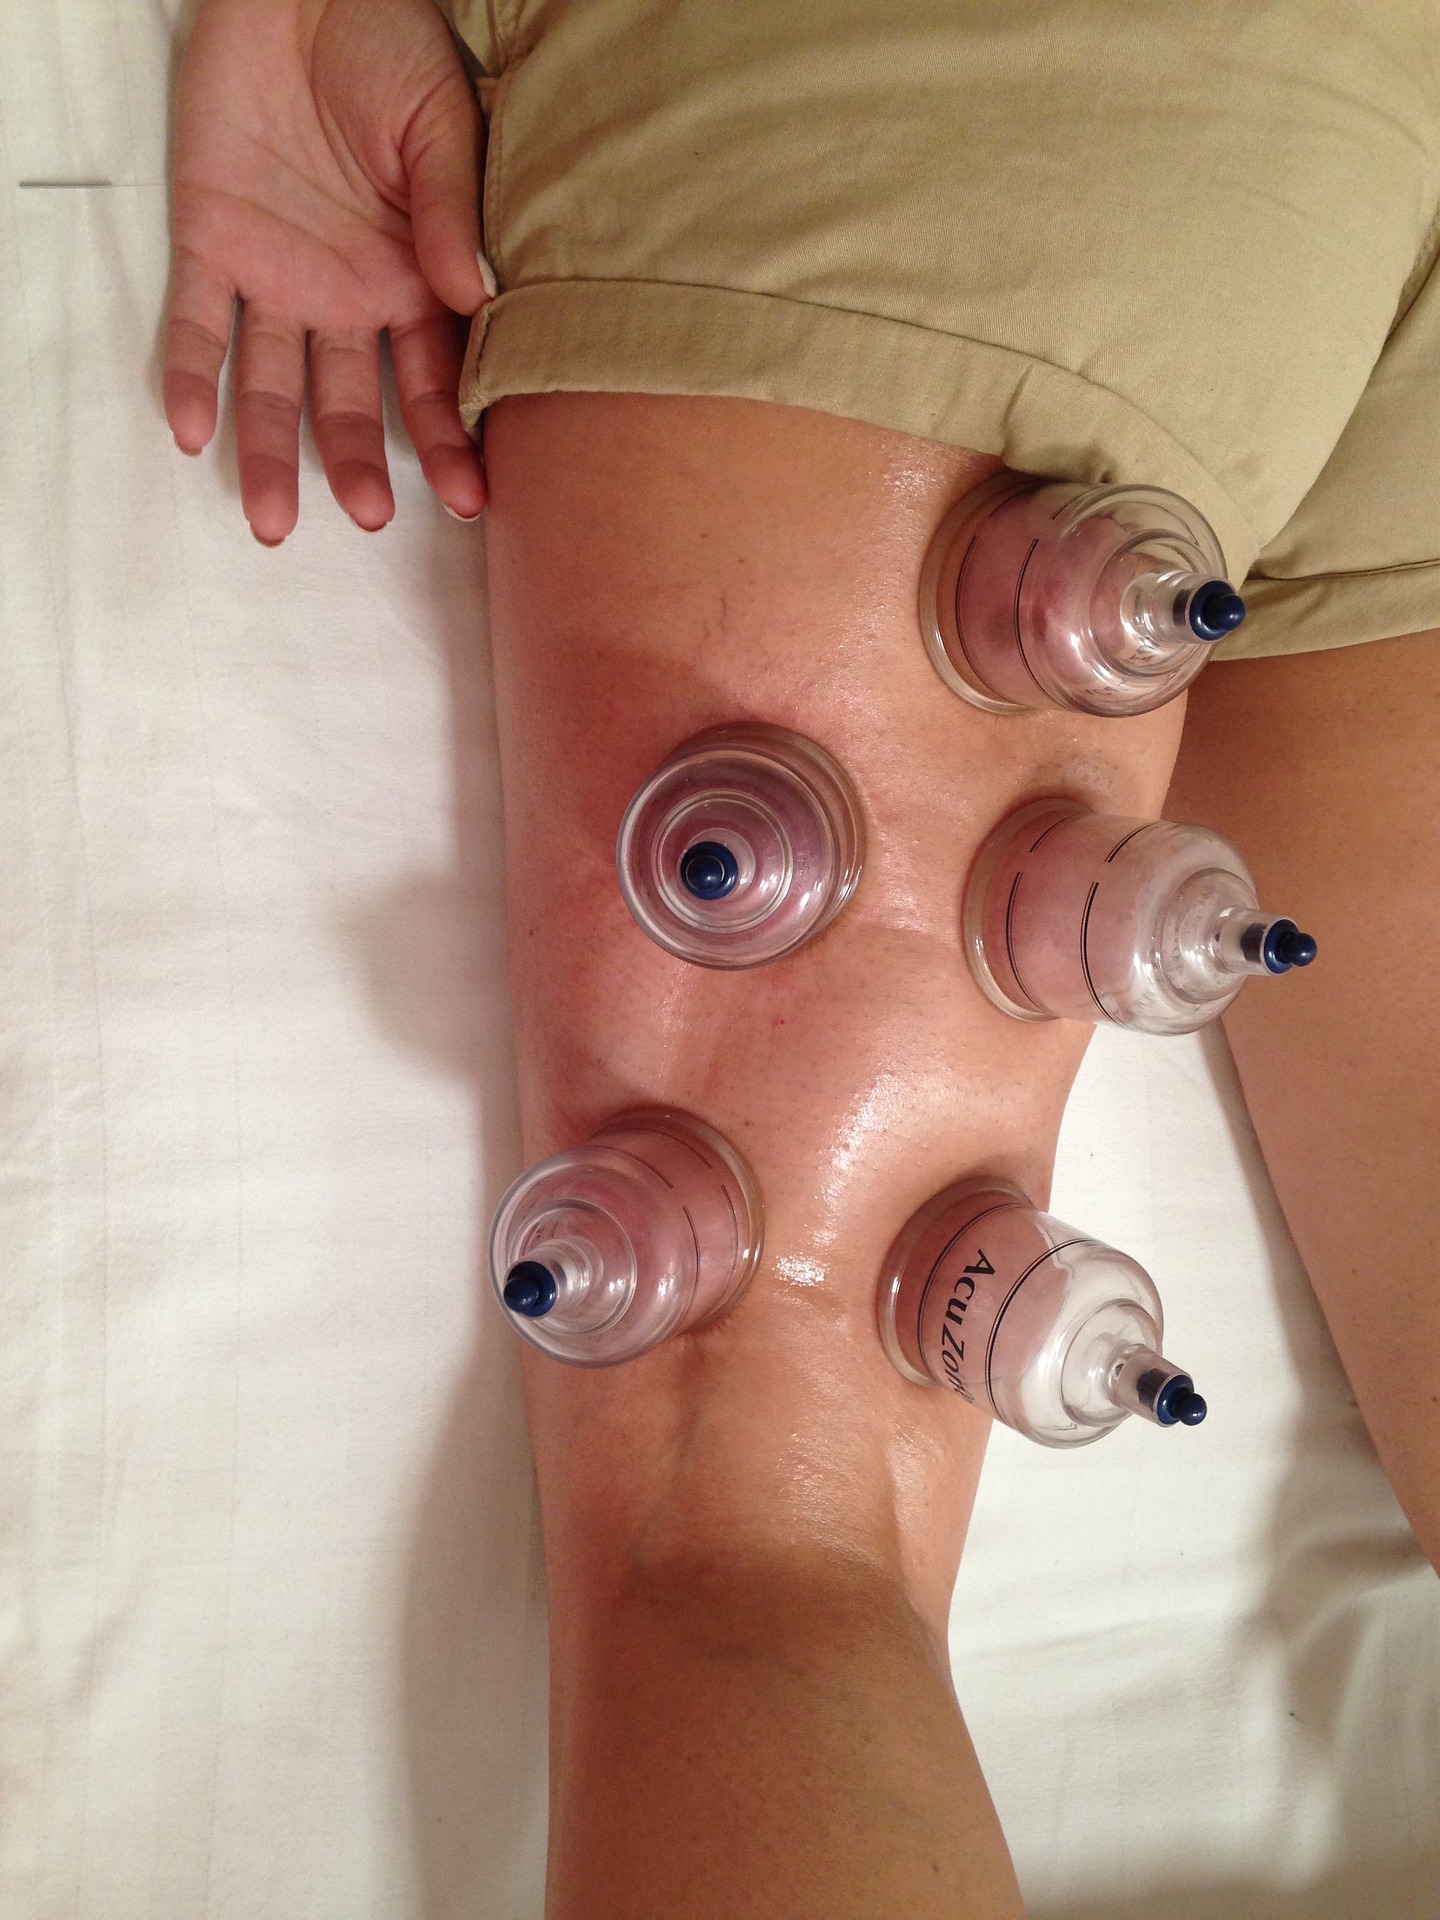 dry cupping